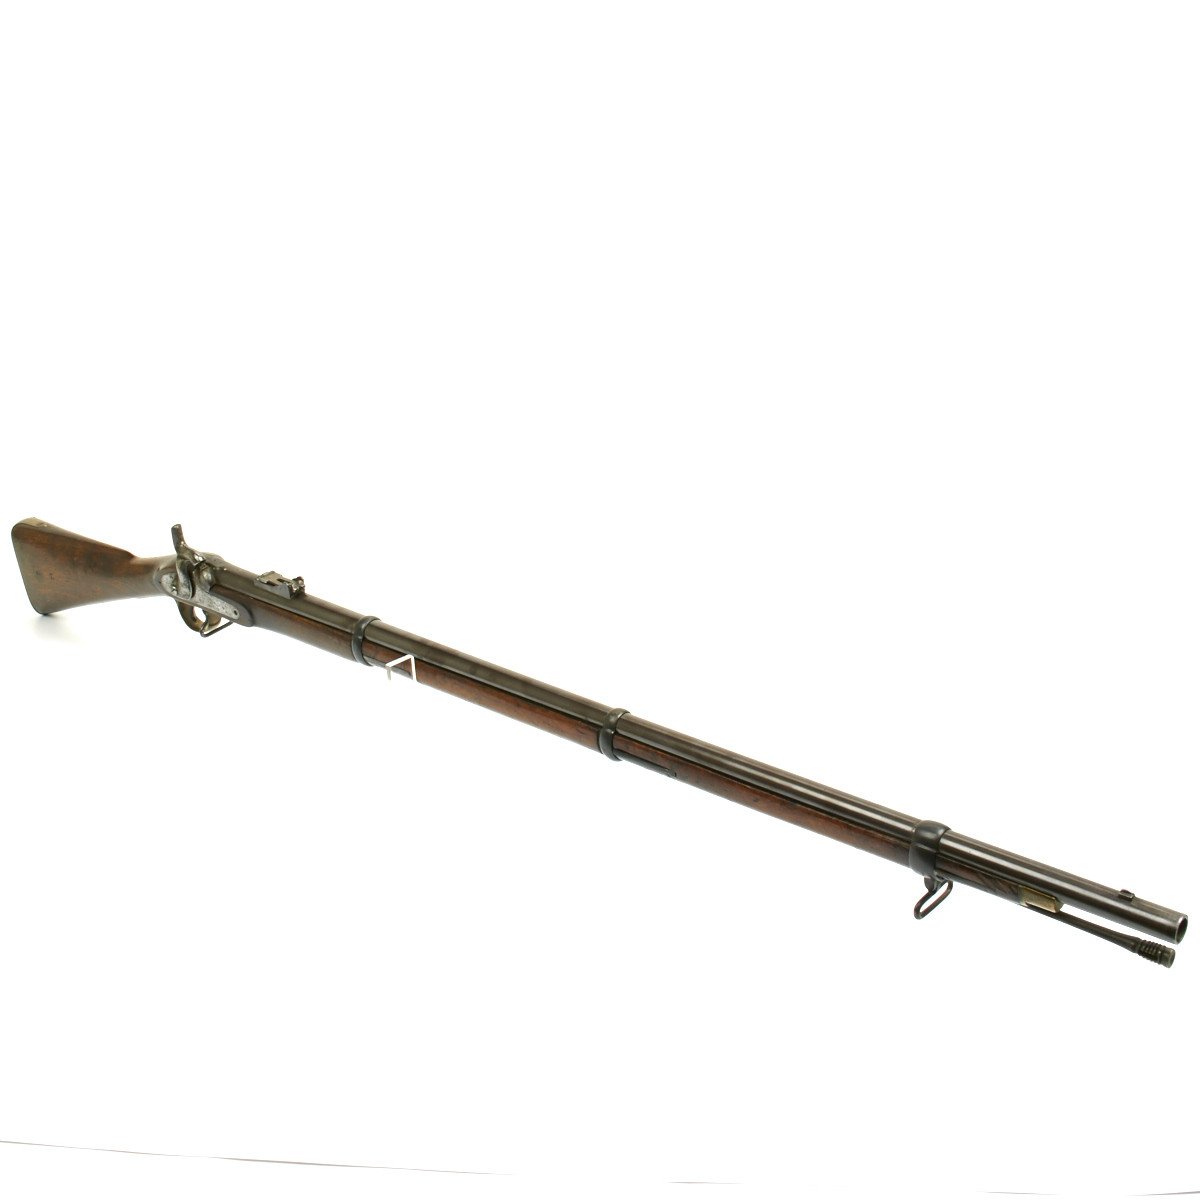 History Plus + - #1857IndependenceWarFacts 🔴Enfield Pattern 1853 Rifle-Musket  The immediate reason for the outbreak of War of 1857 was the introduction  of a new firearm in India:- the Pattern 1853 Enfield